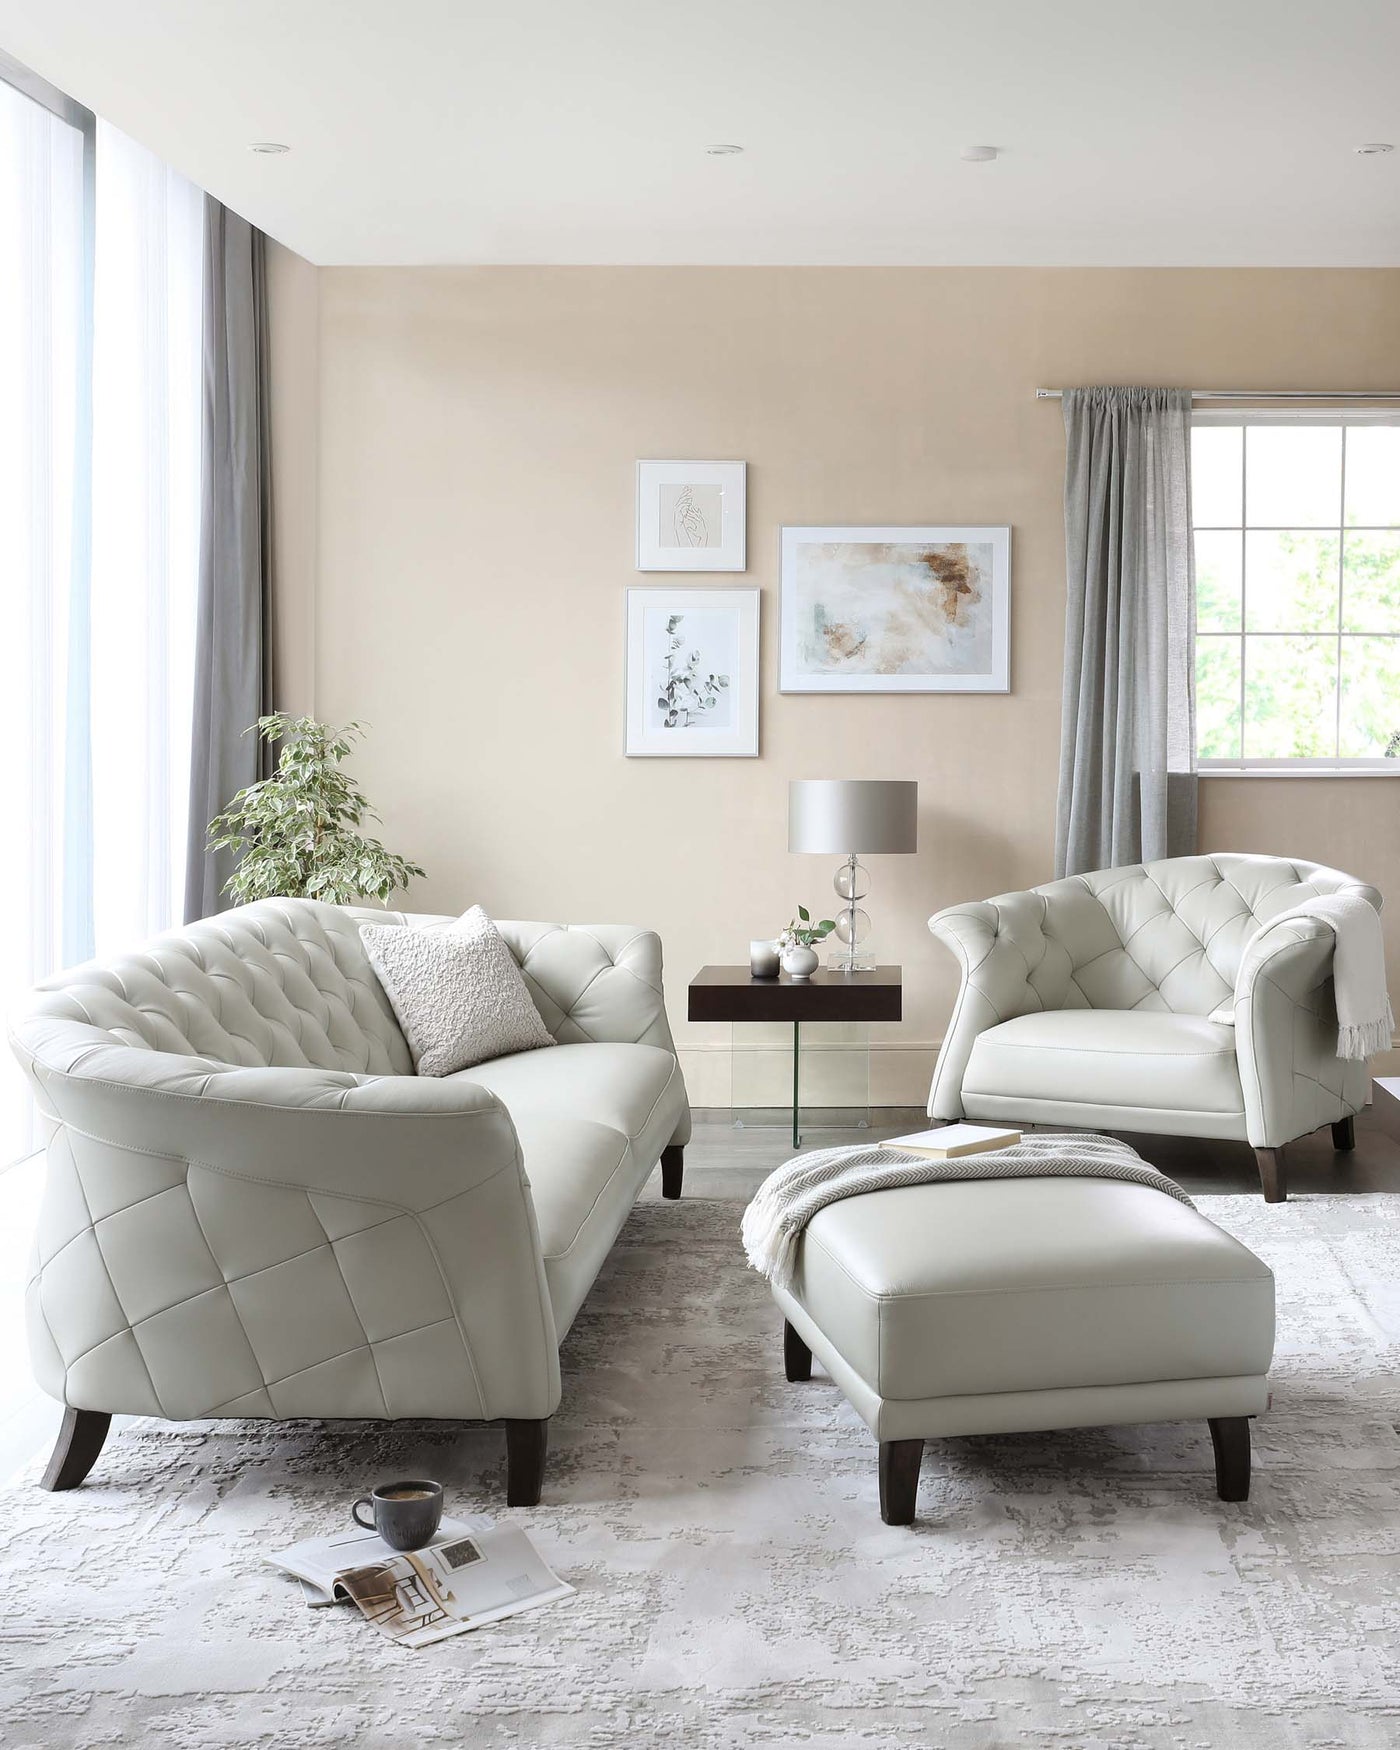 Elegant contemporary living room furniture set in a neutral colour palette, featuring a diamond-tufted three-seater sofa and matching armchair with curved backrests, complemented by a tufted ottoman, all with dark wooden legs, arranged on a textured area rug. A modern side table with a table lamp and decorative vase is placed beside the armchair.